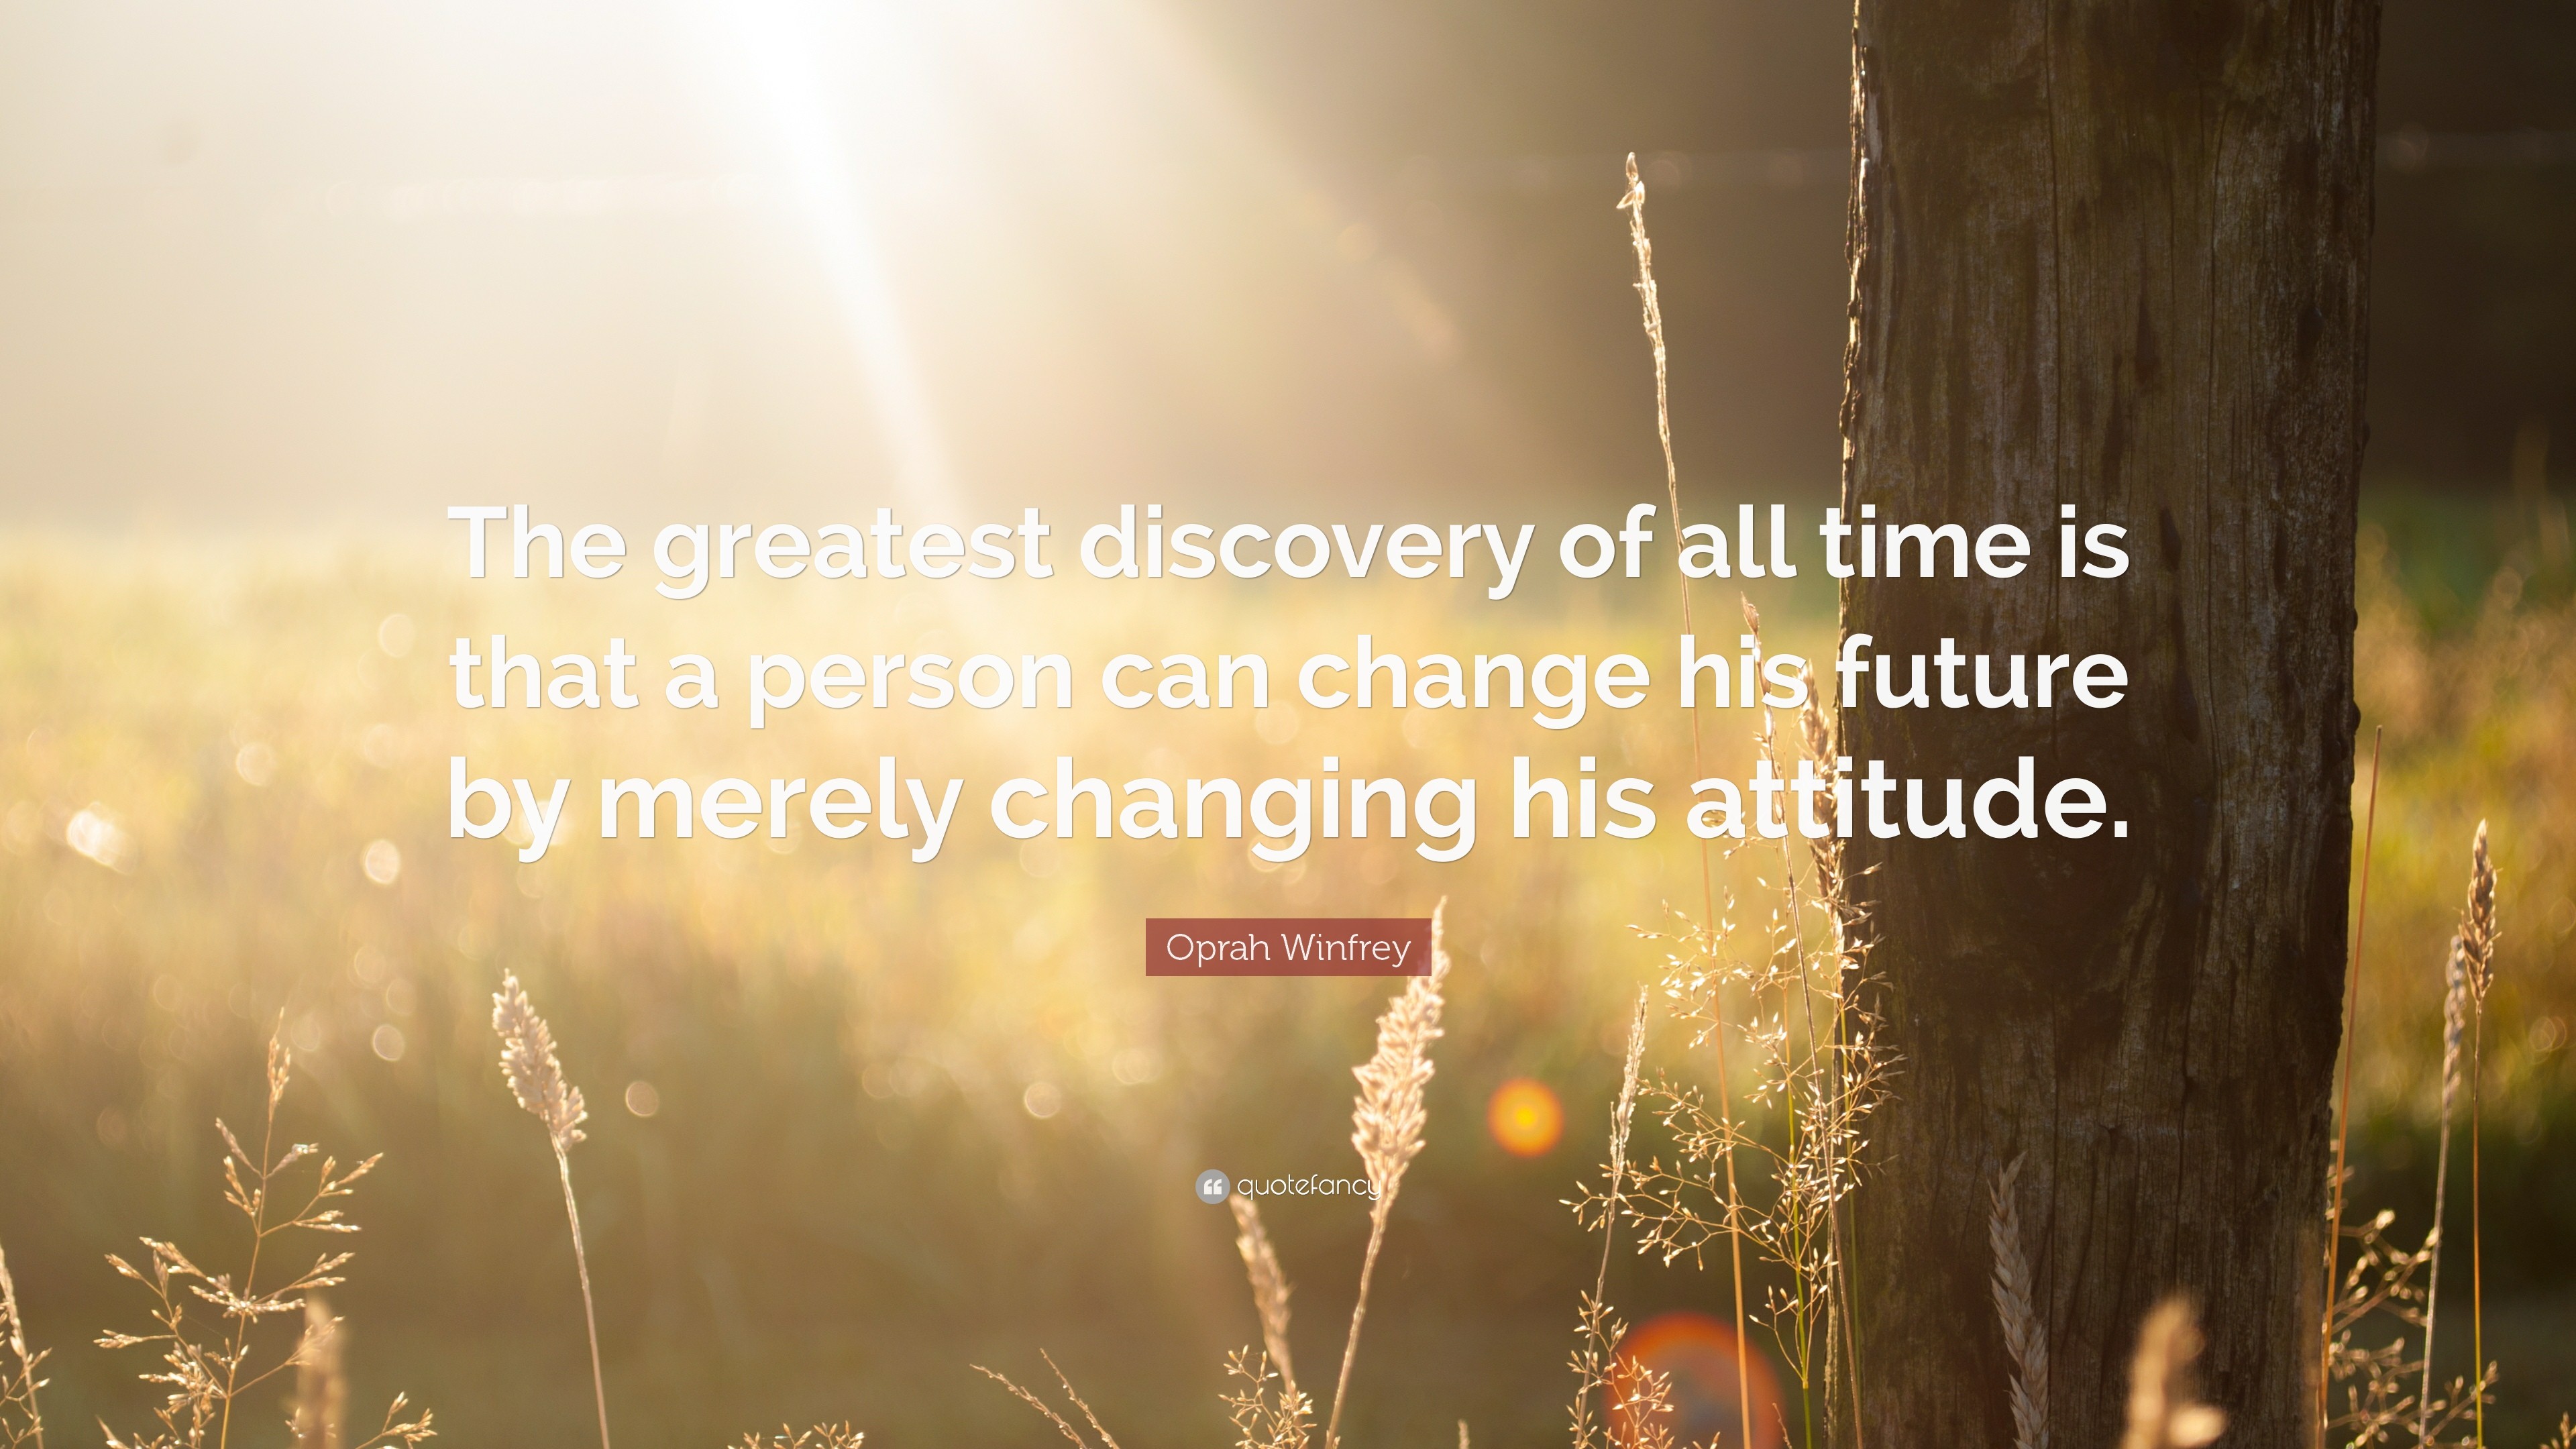 3840x2160 Oprah Winfrey Quote: “The greatest discovery of all time is that a person  can